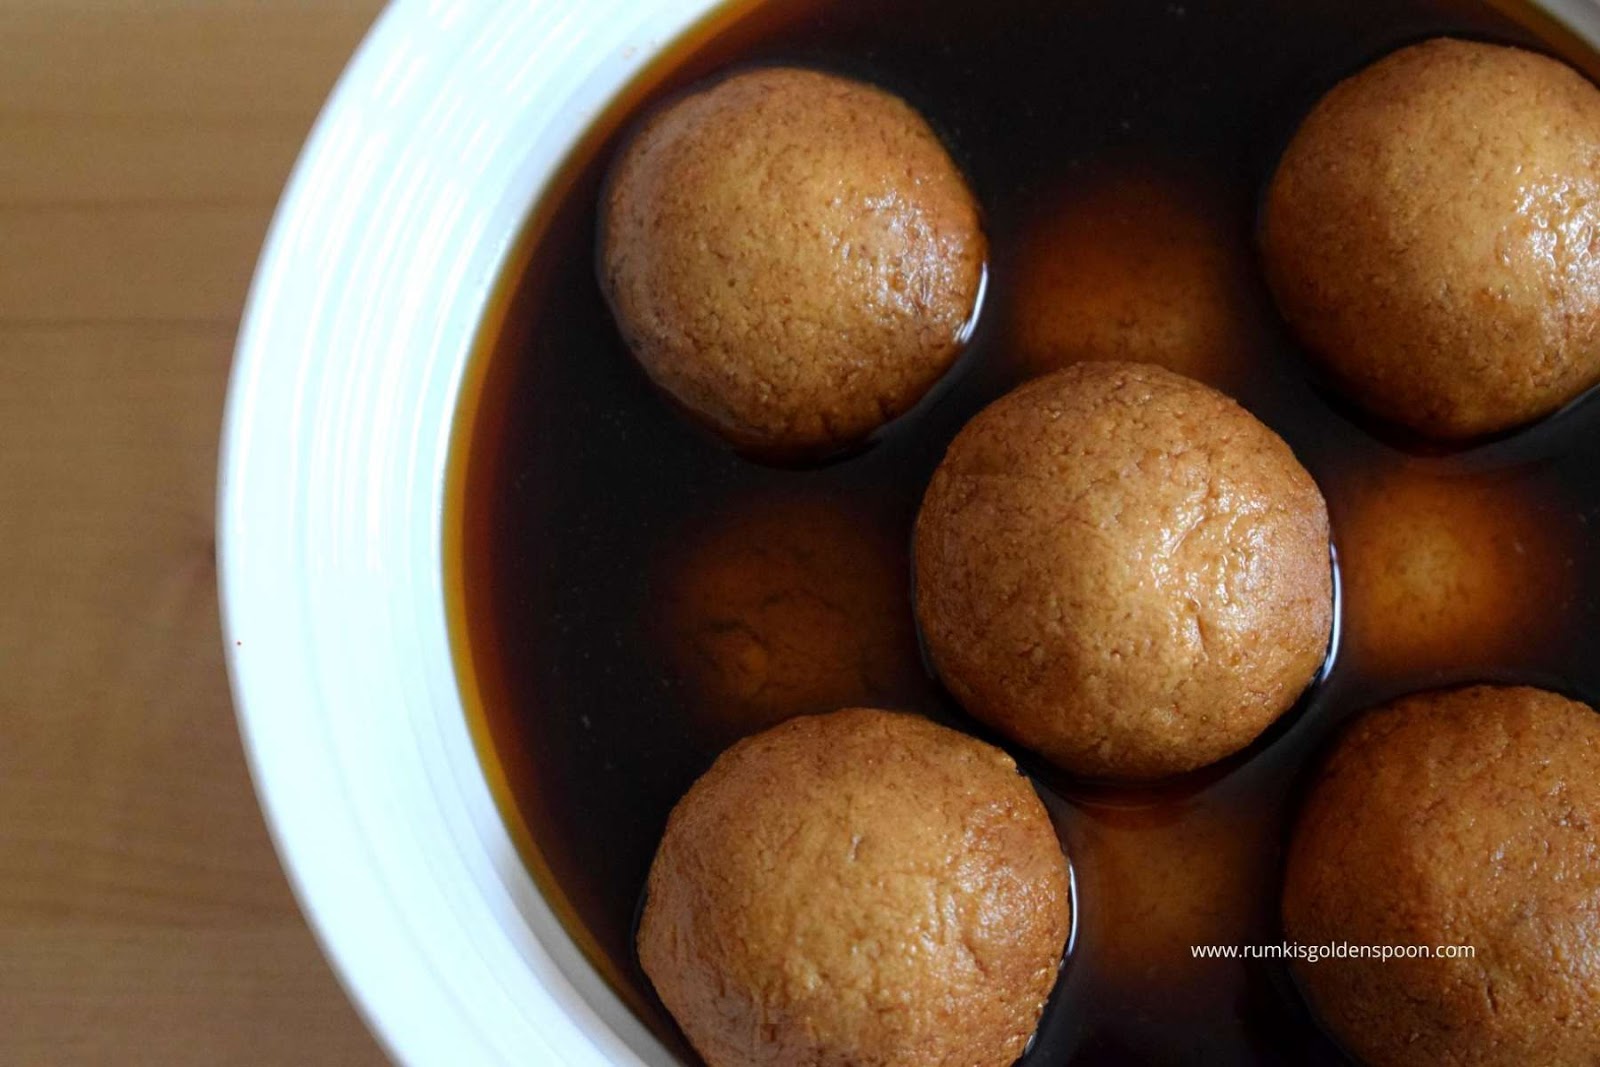 patali gur recipes, sweets with jaggery, jaggery sweet recipes, date palm jaggery recipes, rasgulla, gur rasgulla, rasgulla recipe, rosogolla, how to prepare rasgulla,bengali sweet,indian dessert recipe, Nolen Gur Rosogolla, Nolen Gurer Rosogolla, Rumki's Golden Spoon